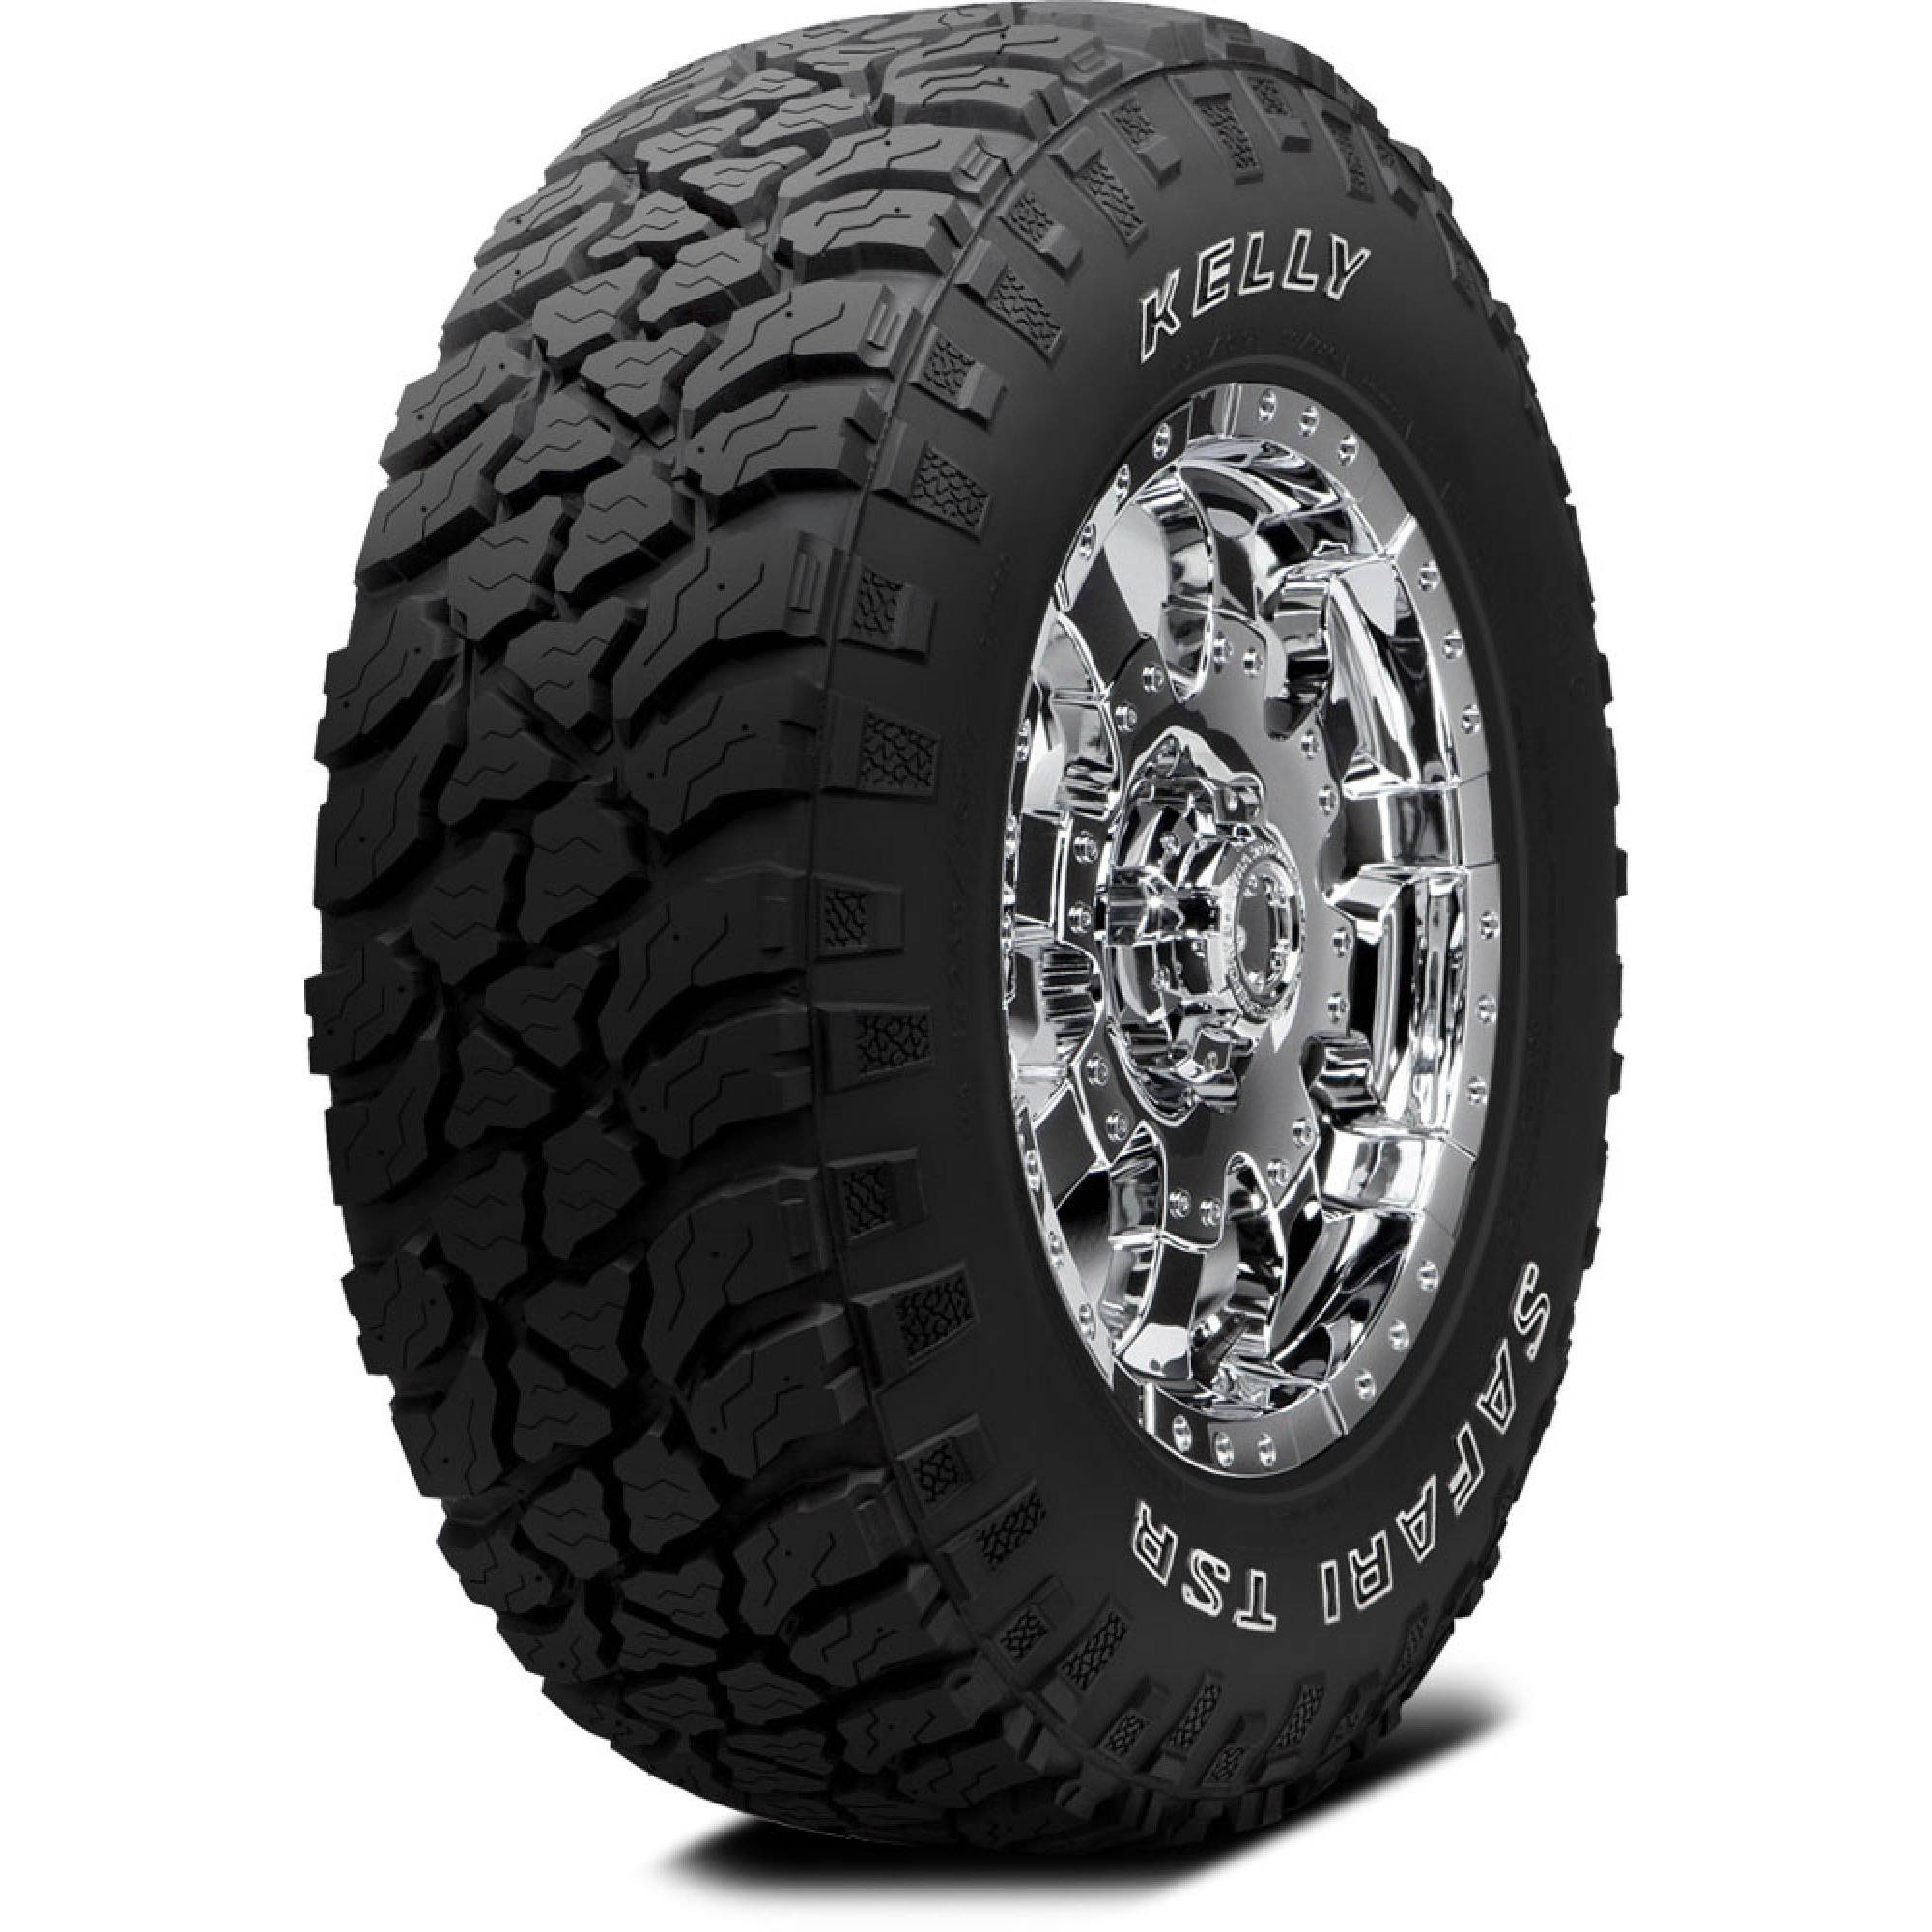 kelly-edge-a-s-356012026-tires-get-reviews-free-shipping-tire